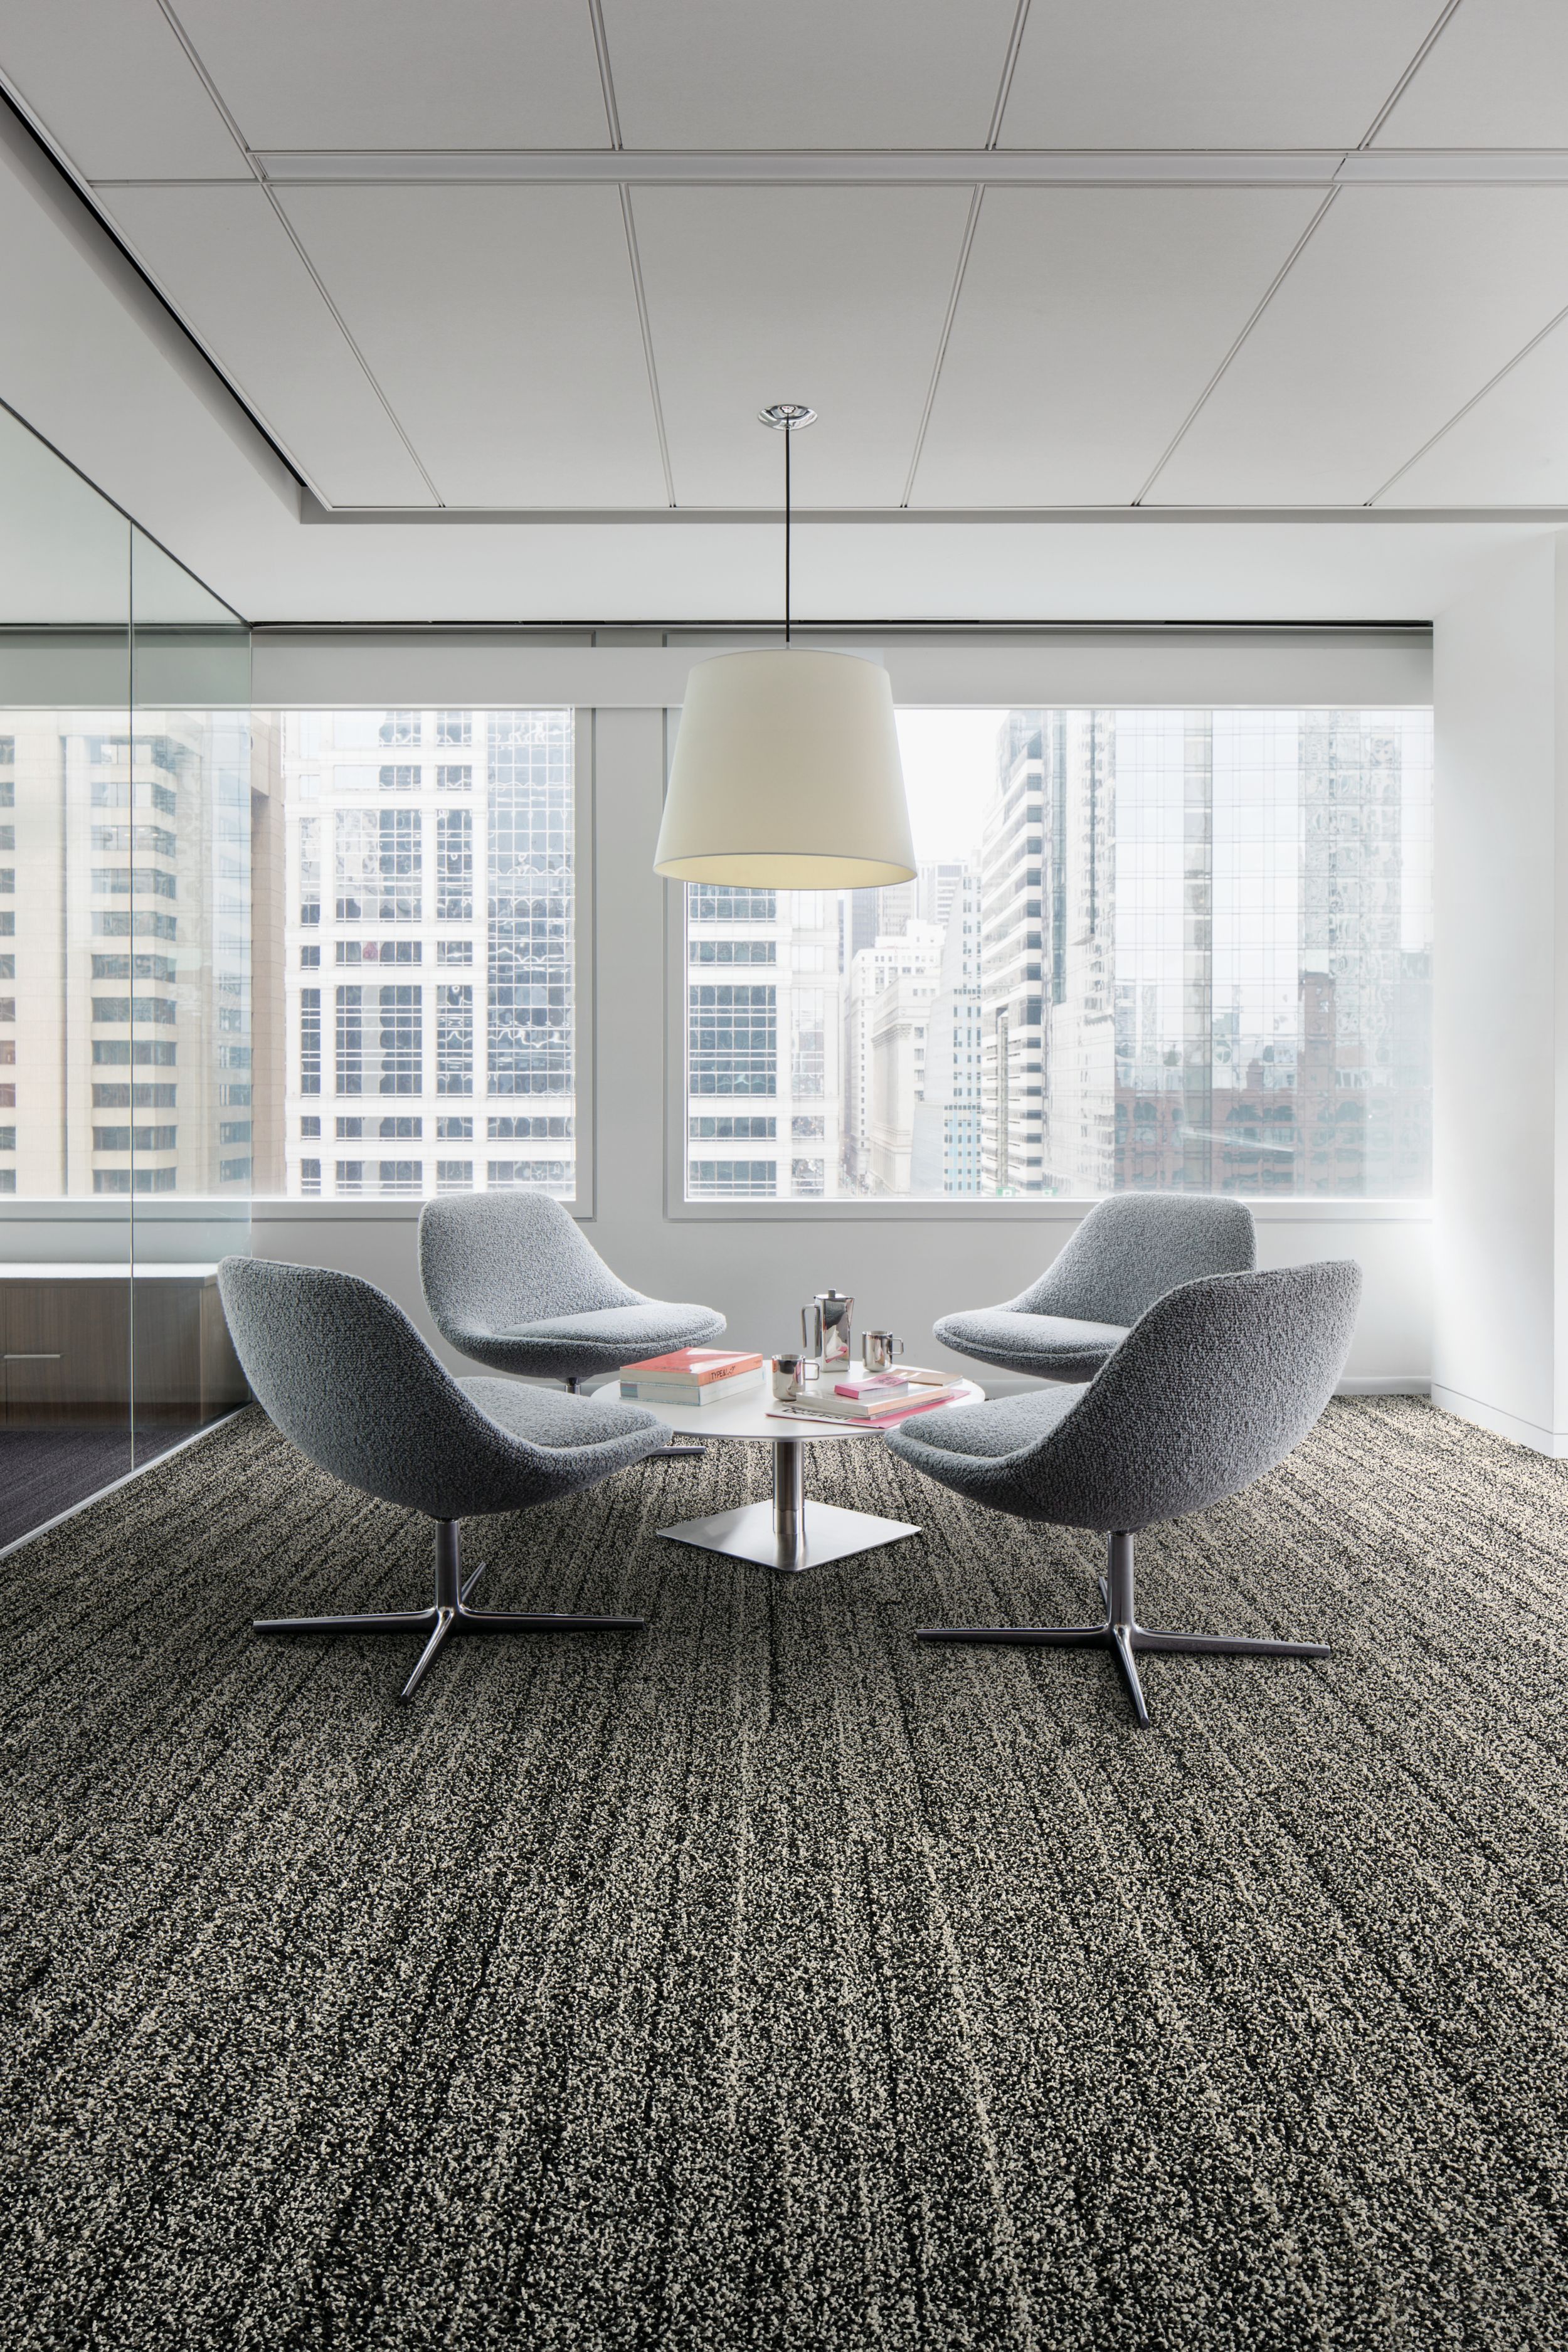 Interface Overedge plank carpet tile with fabric chairs around round table afbeeldingnummer 2